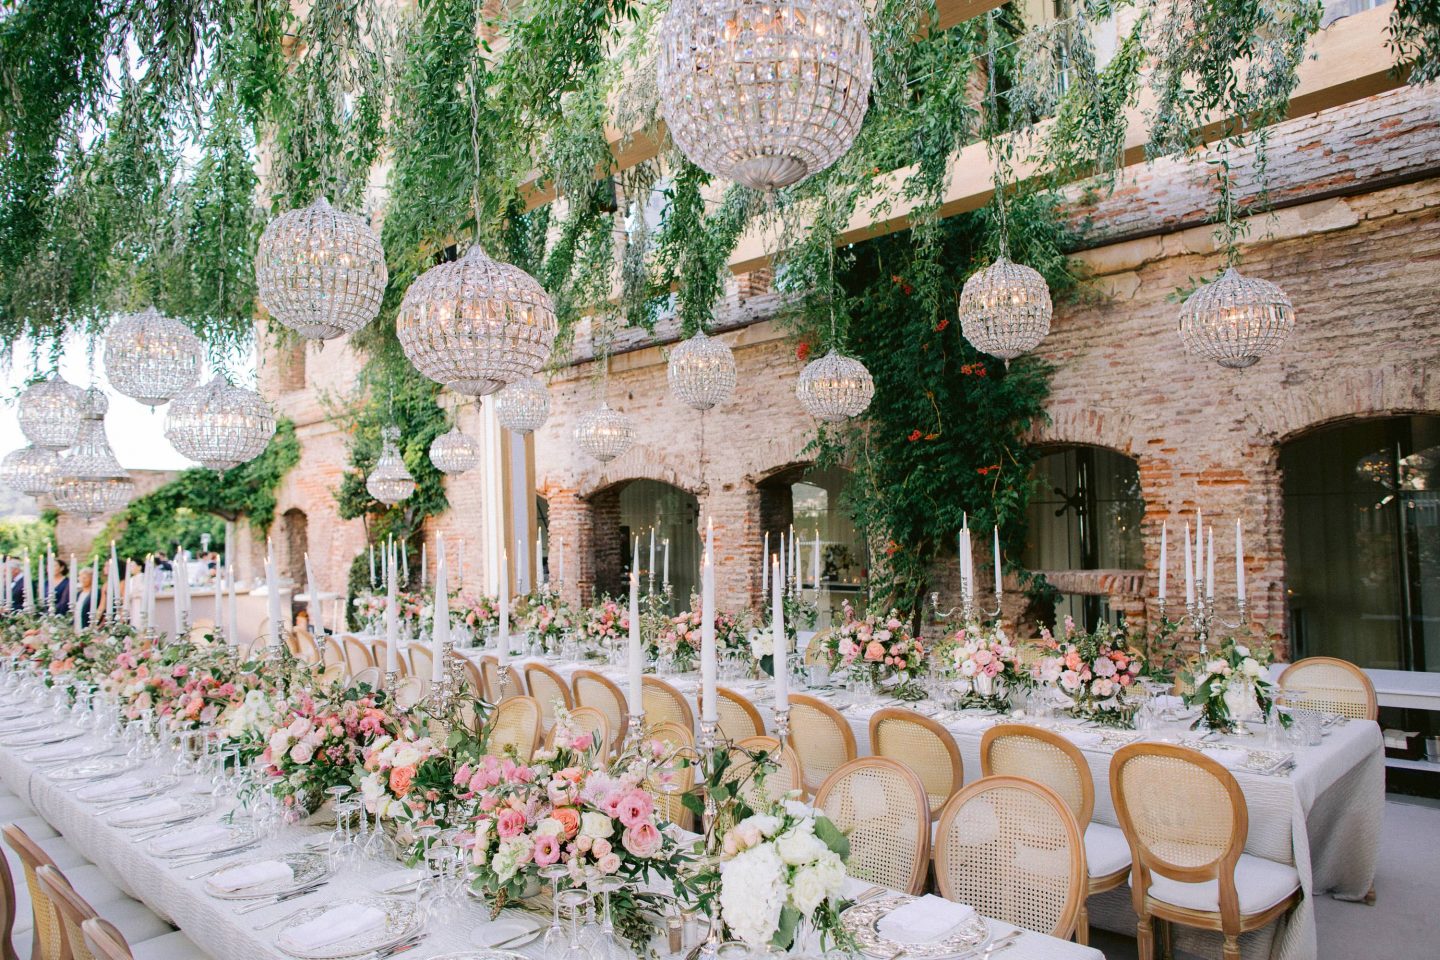 Reception under a garden-inspired pergola beset with taper candles and pink florals at this Istanbul wedding weekend at Four Seasons Bosphorus | Photo by Allan Zepeda